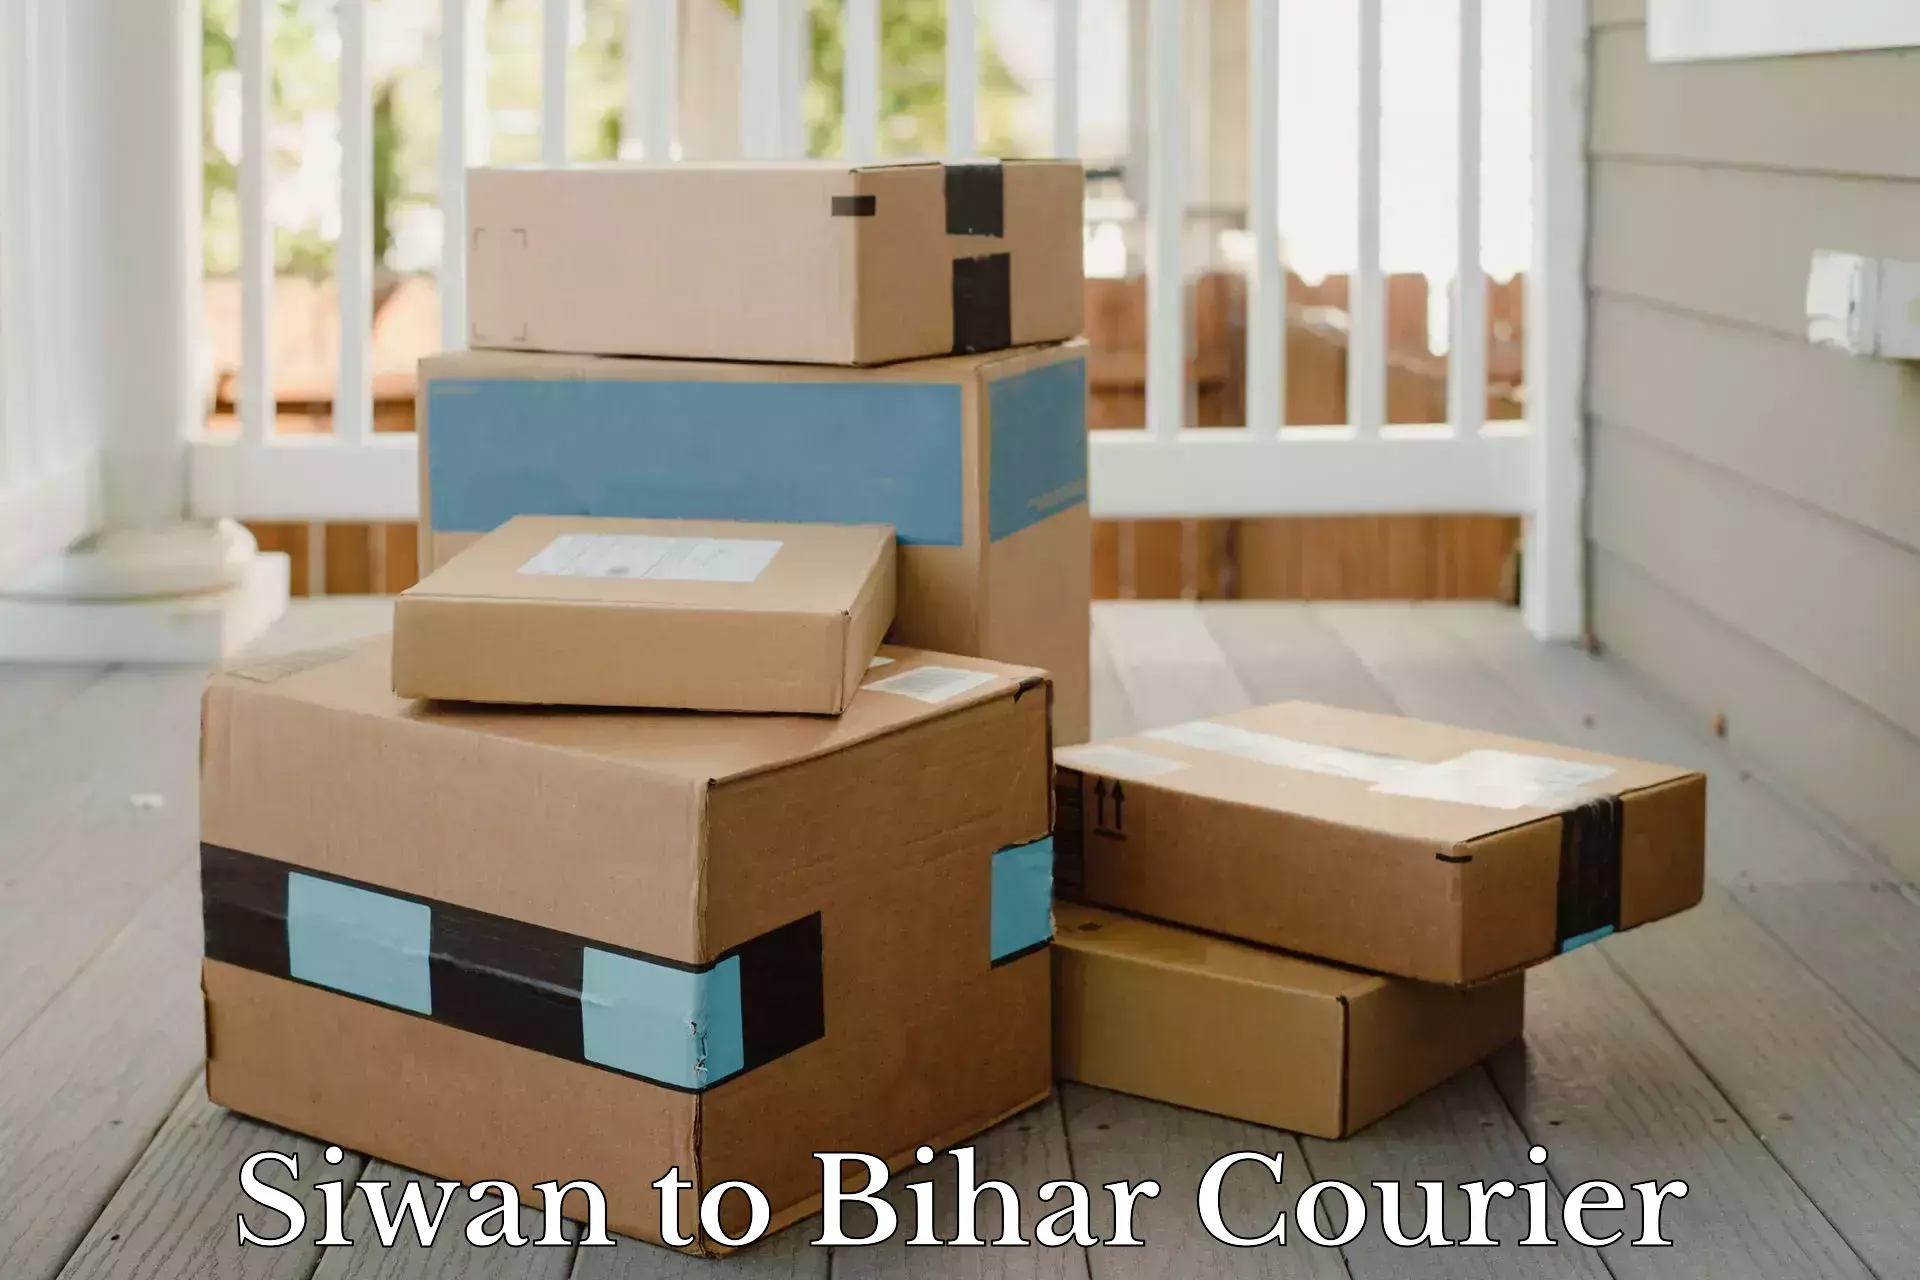 State-of-the-art courier technology Siwan to Palasi Araria